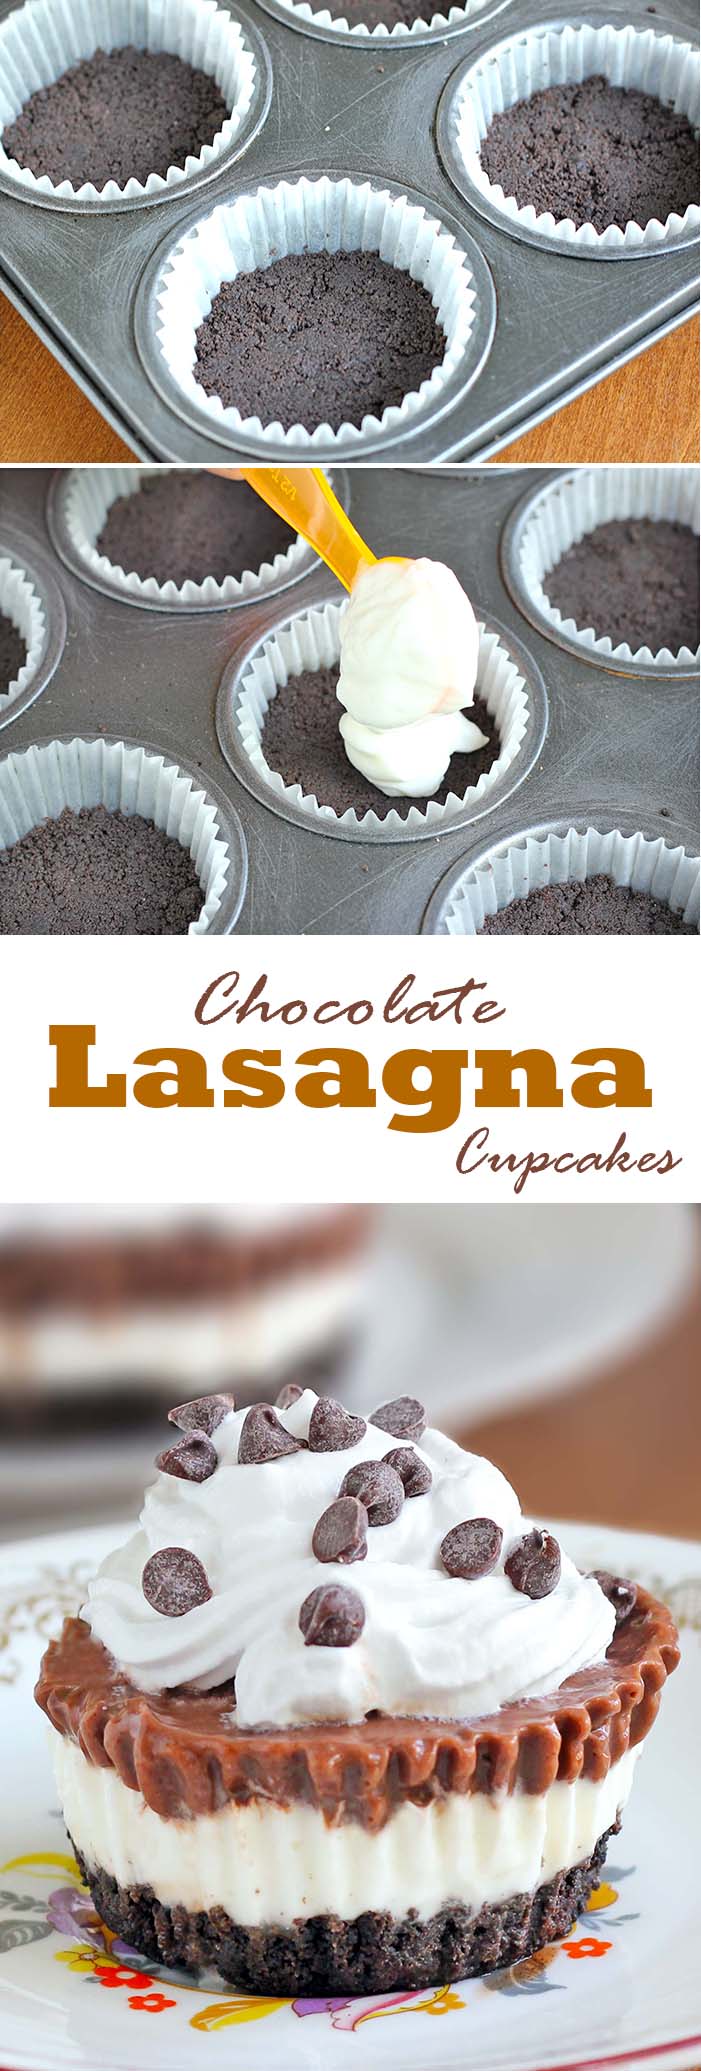 Try this delicious chocolate lasagna cupcakes, and we are sure it will become your favorite summer or any other time treat!